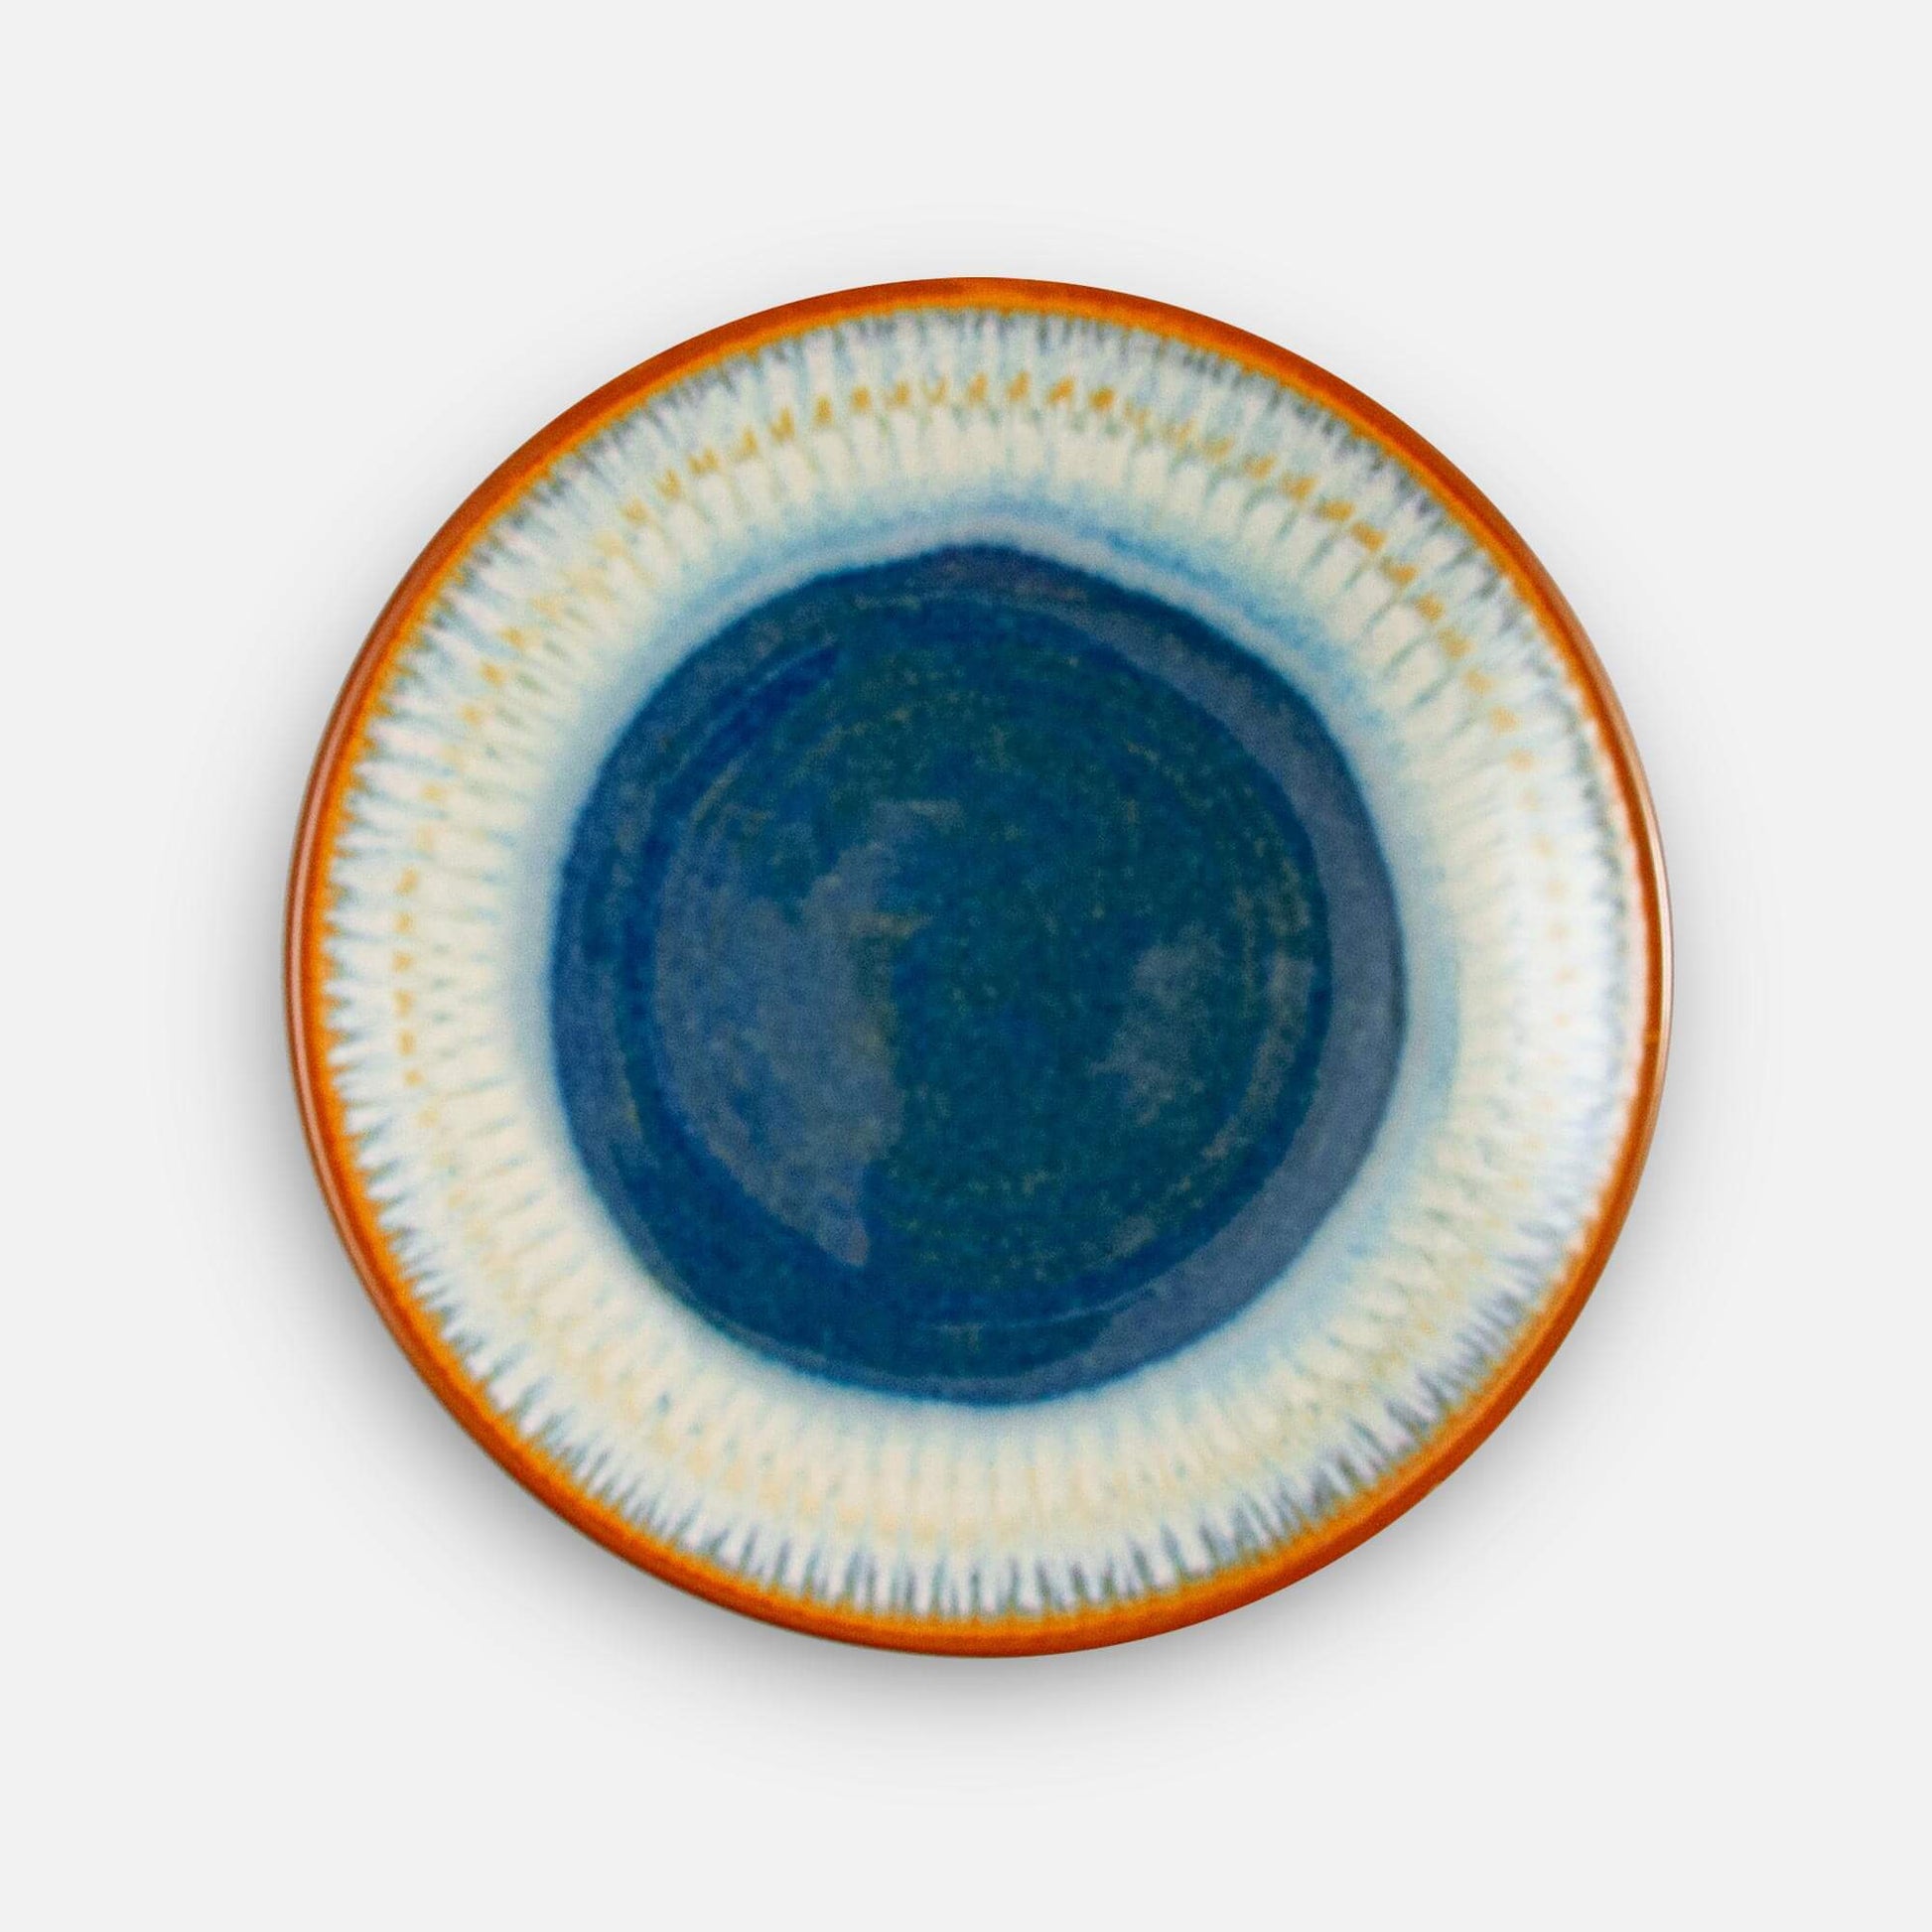 Handmade Pottery Footed Dinner Plate in Cobalt pattern made by Georgetown Pottery in Maine